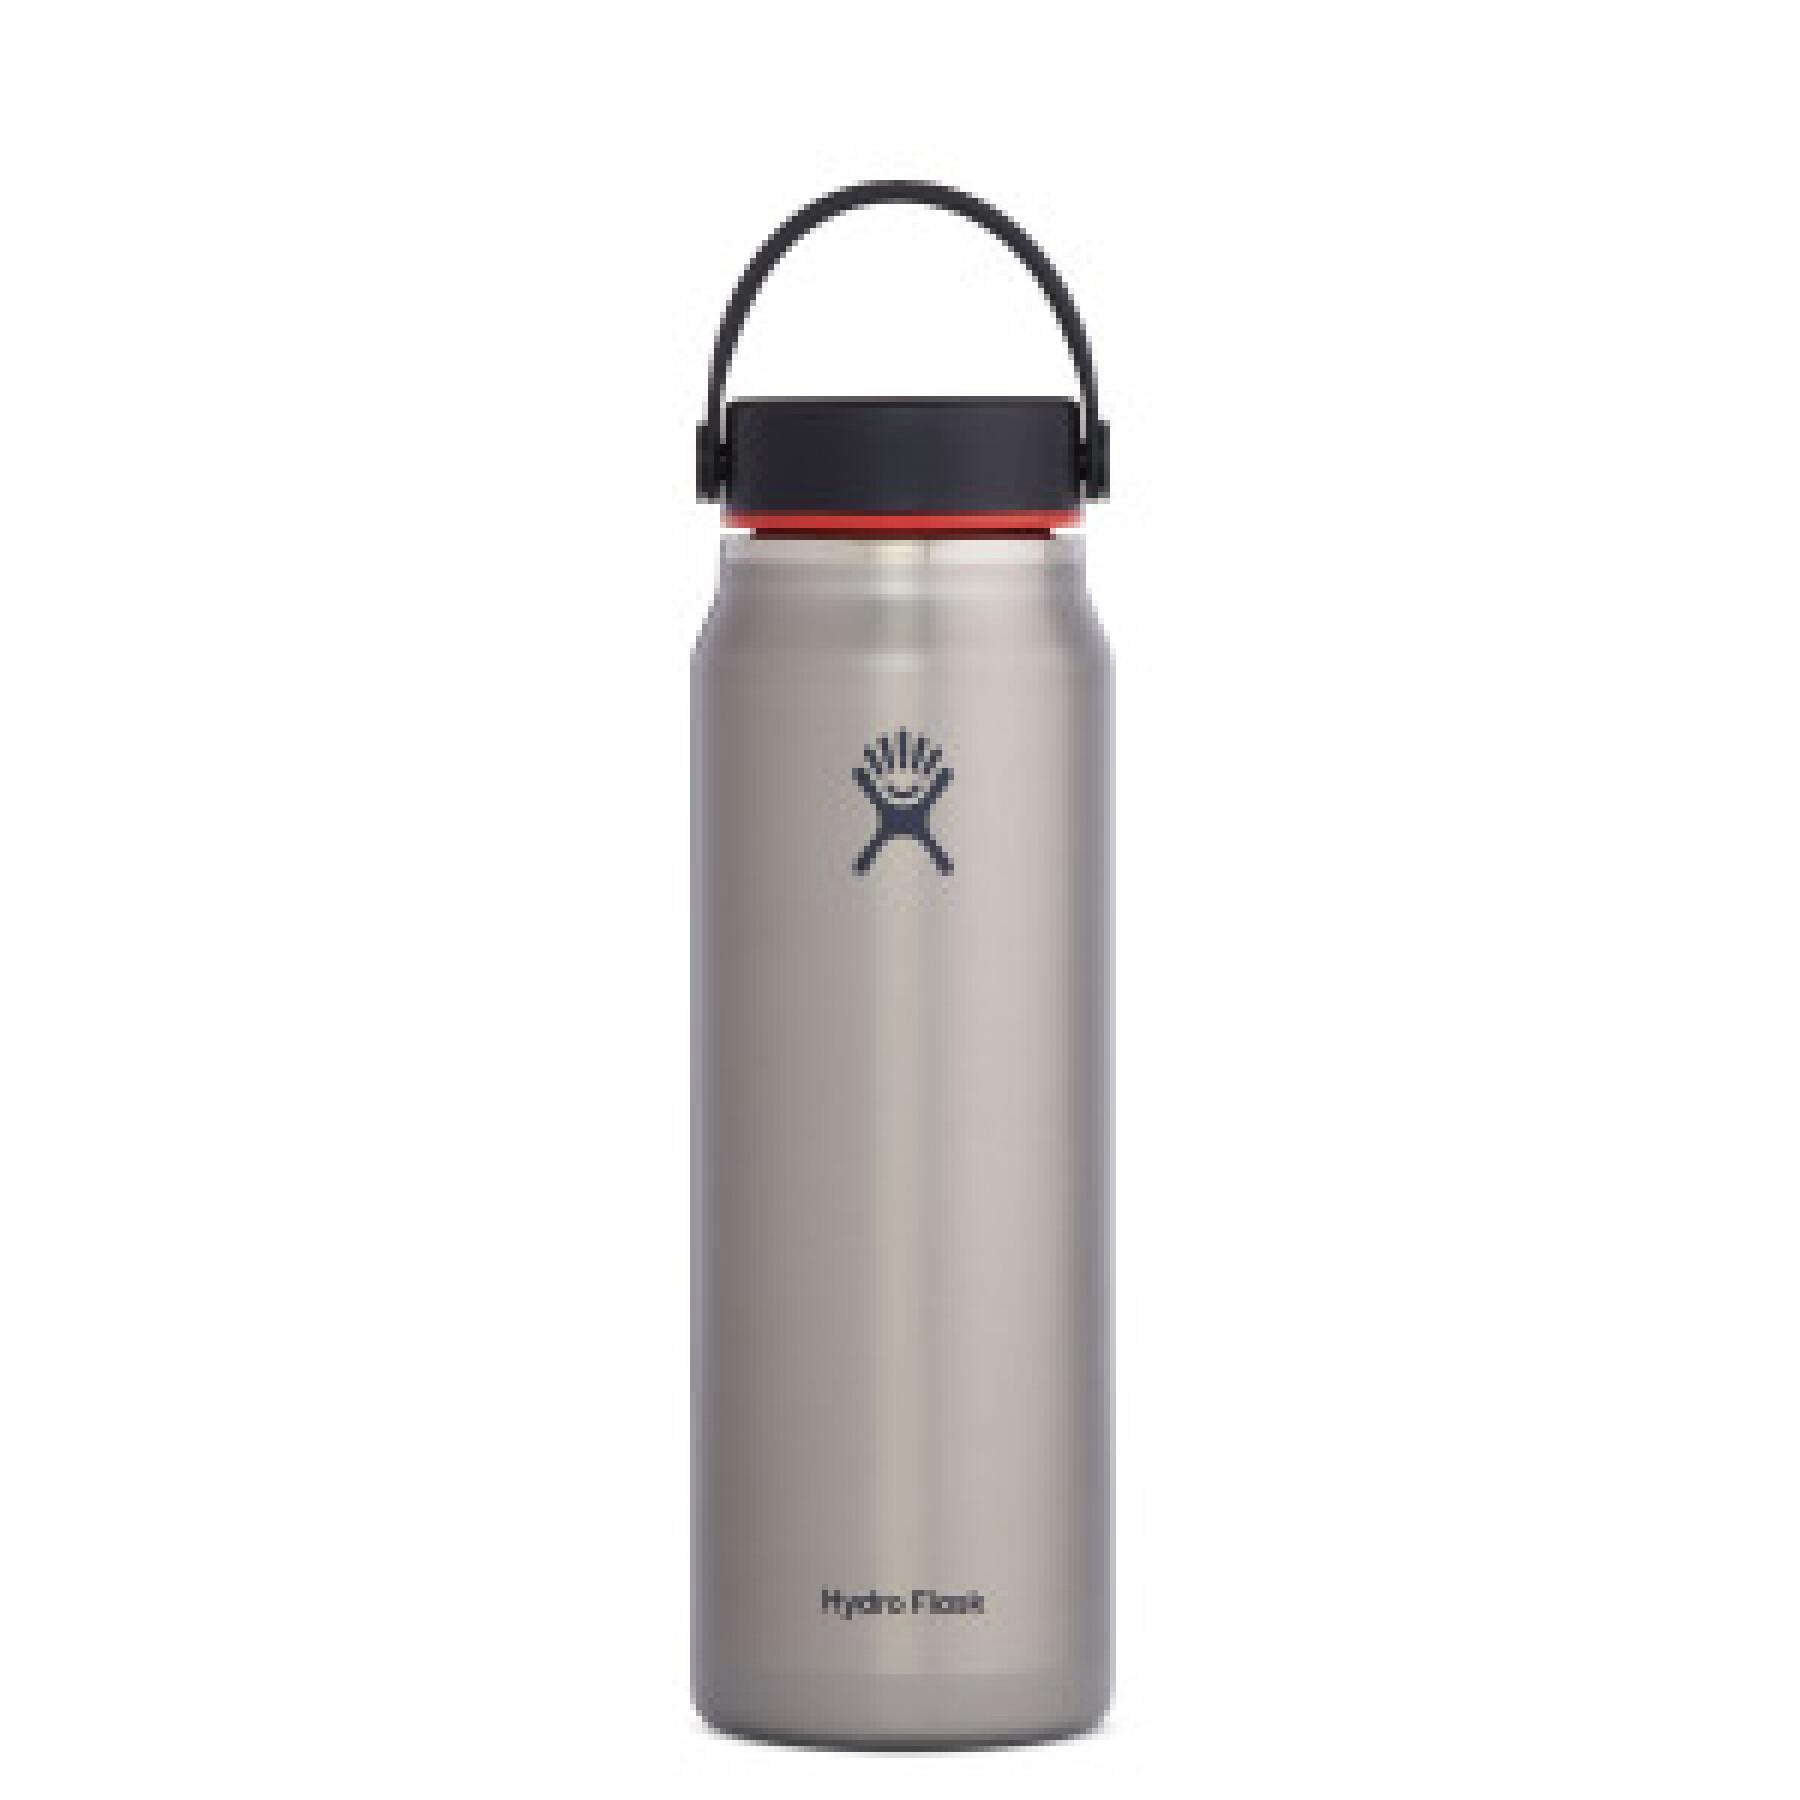 Termos Hydro Flask wide mouth trail lightweight with flex cap 32 oz